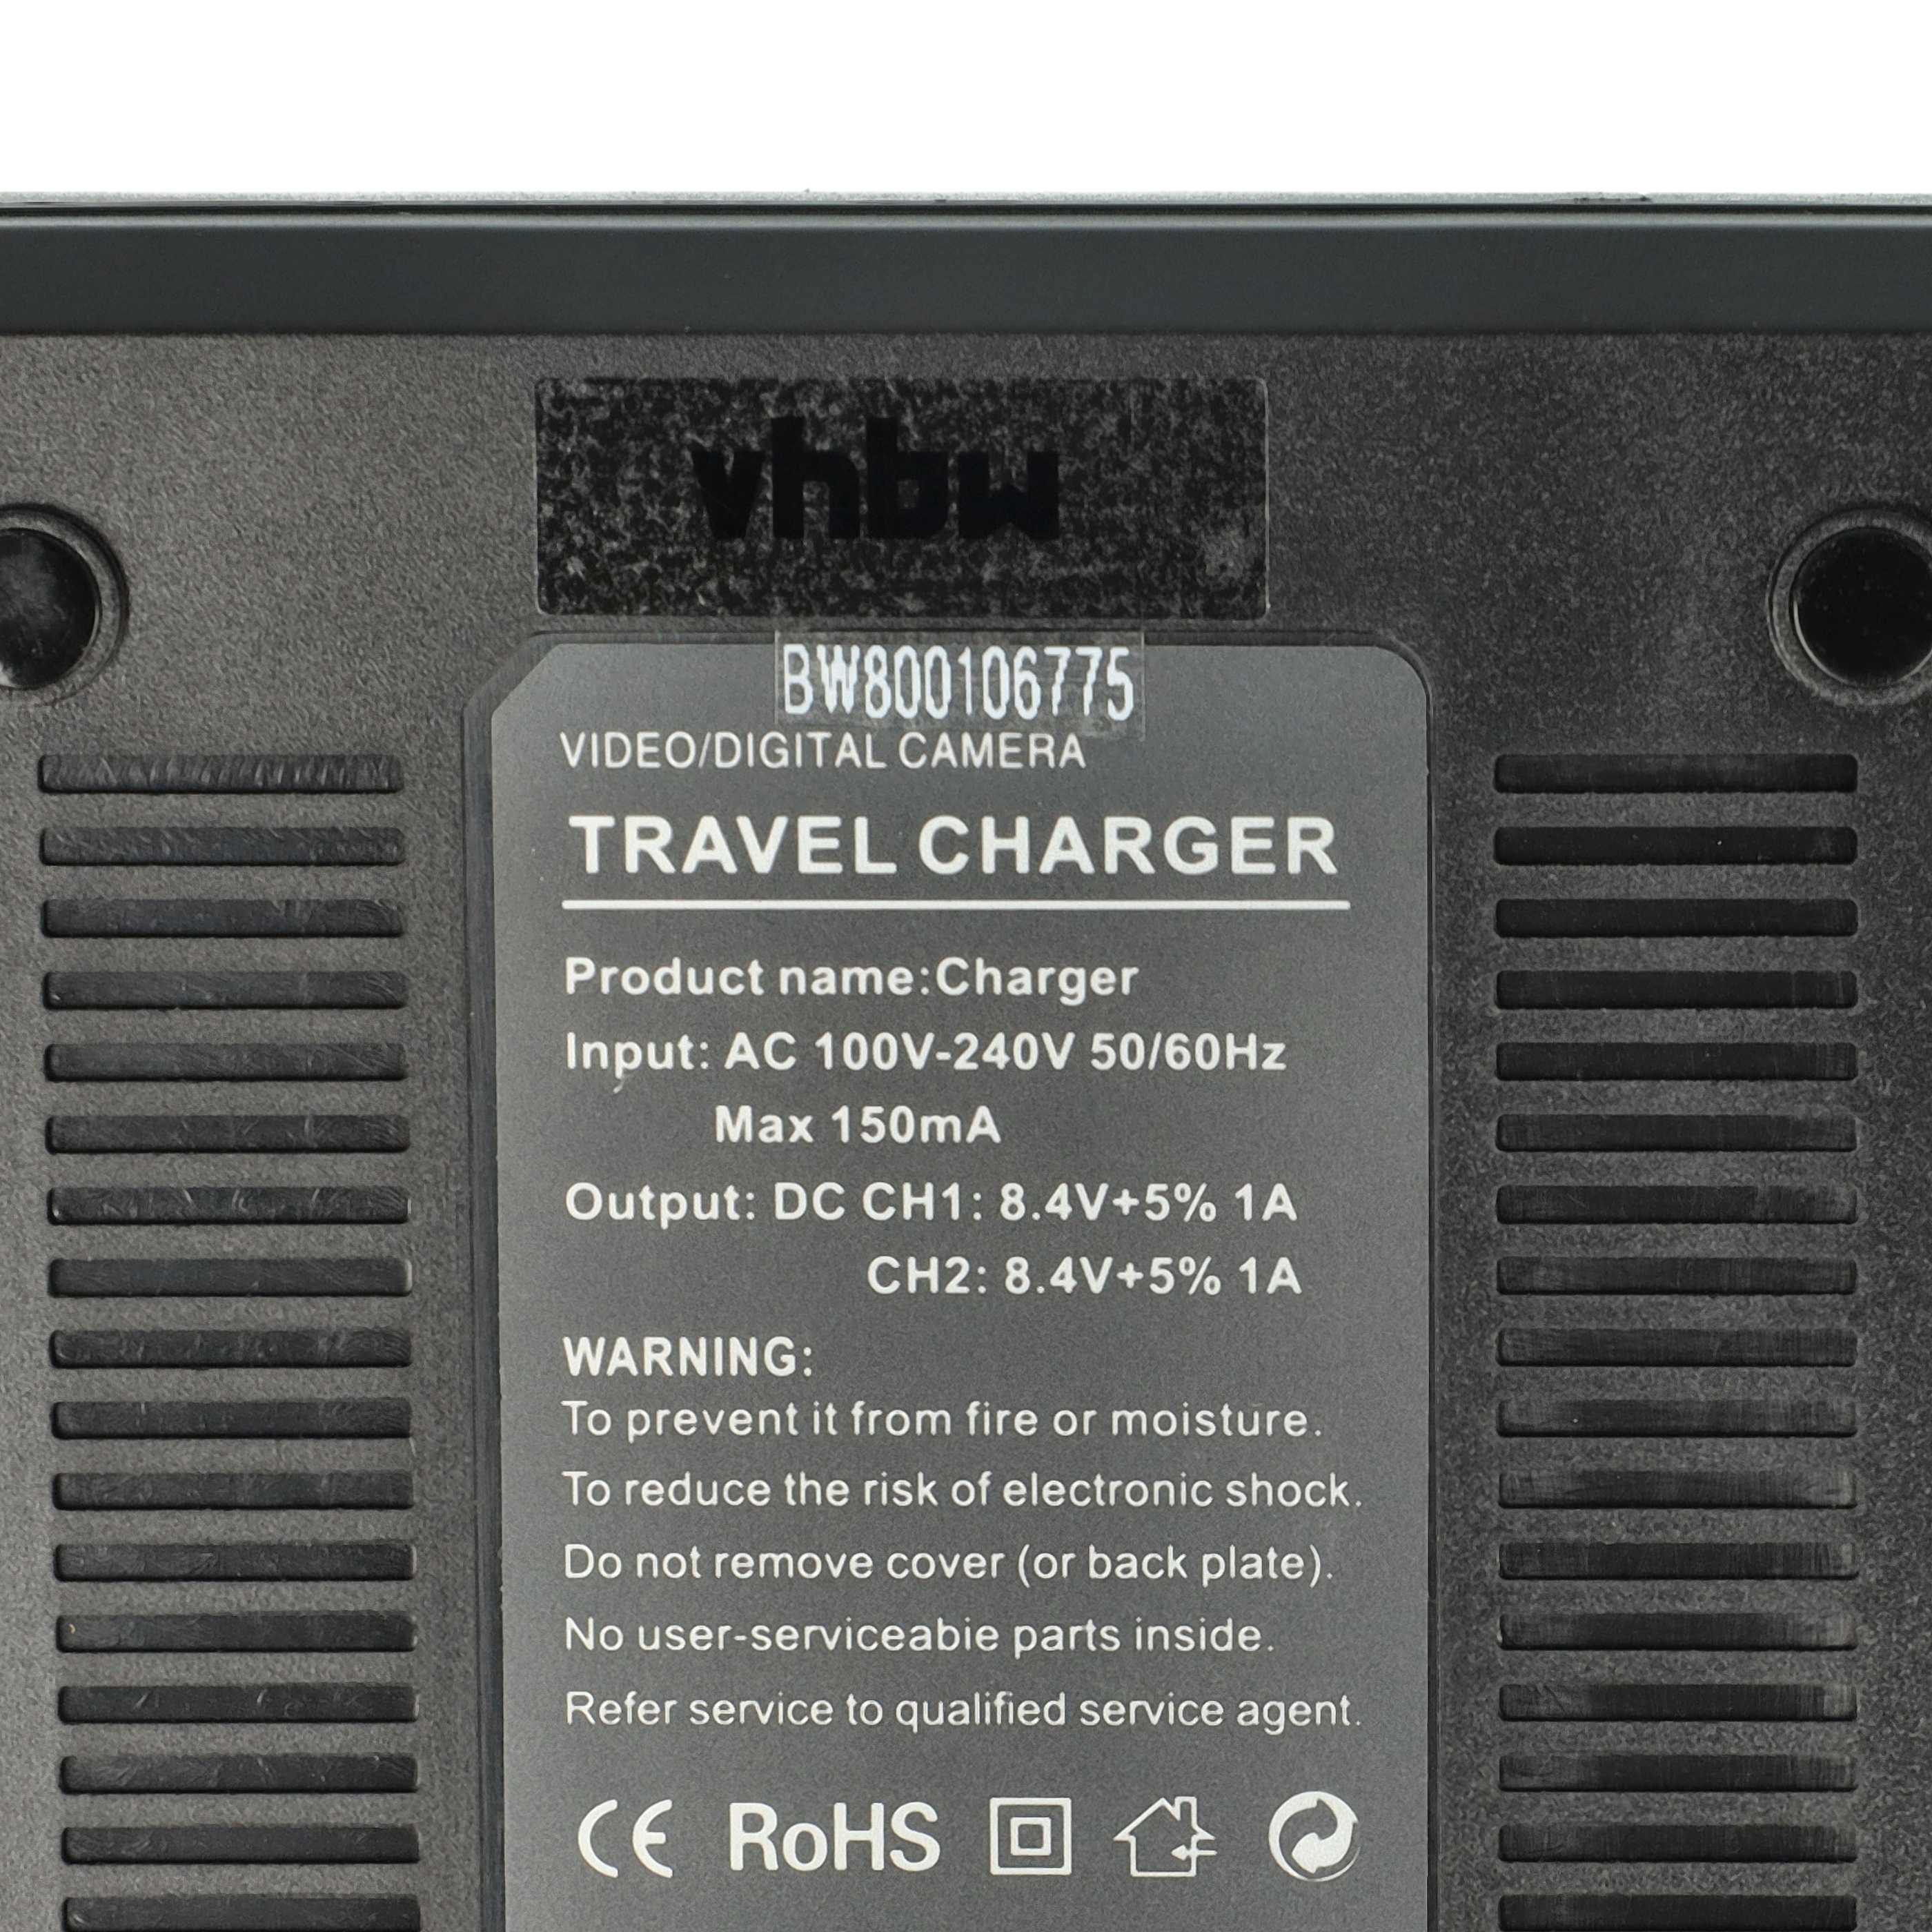 Battery Charger suitable for PowerShot G10 Camera etc. - 0.5 / 0.9 A, 4.2/8.4 V